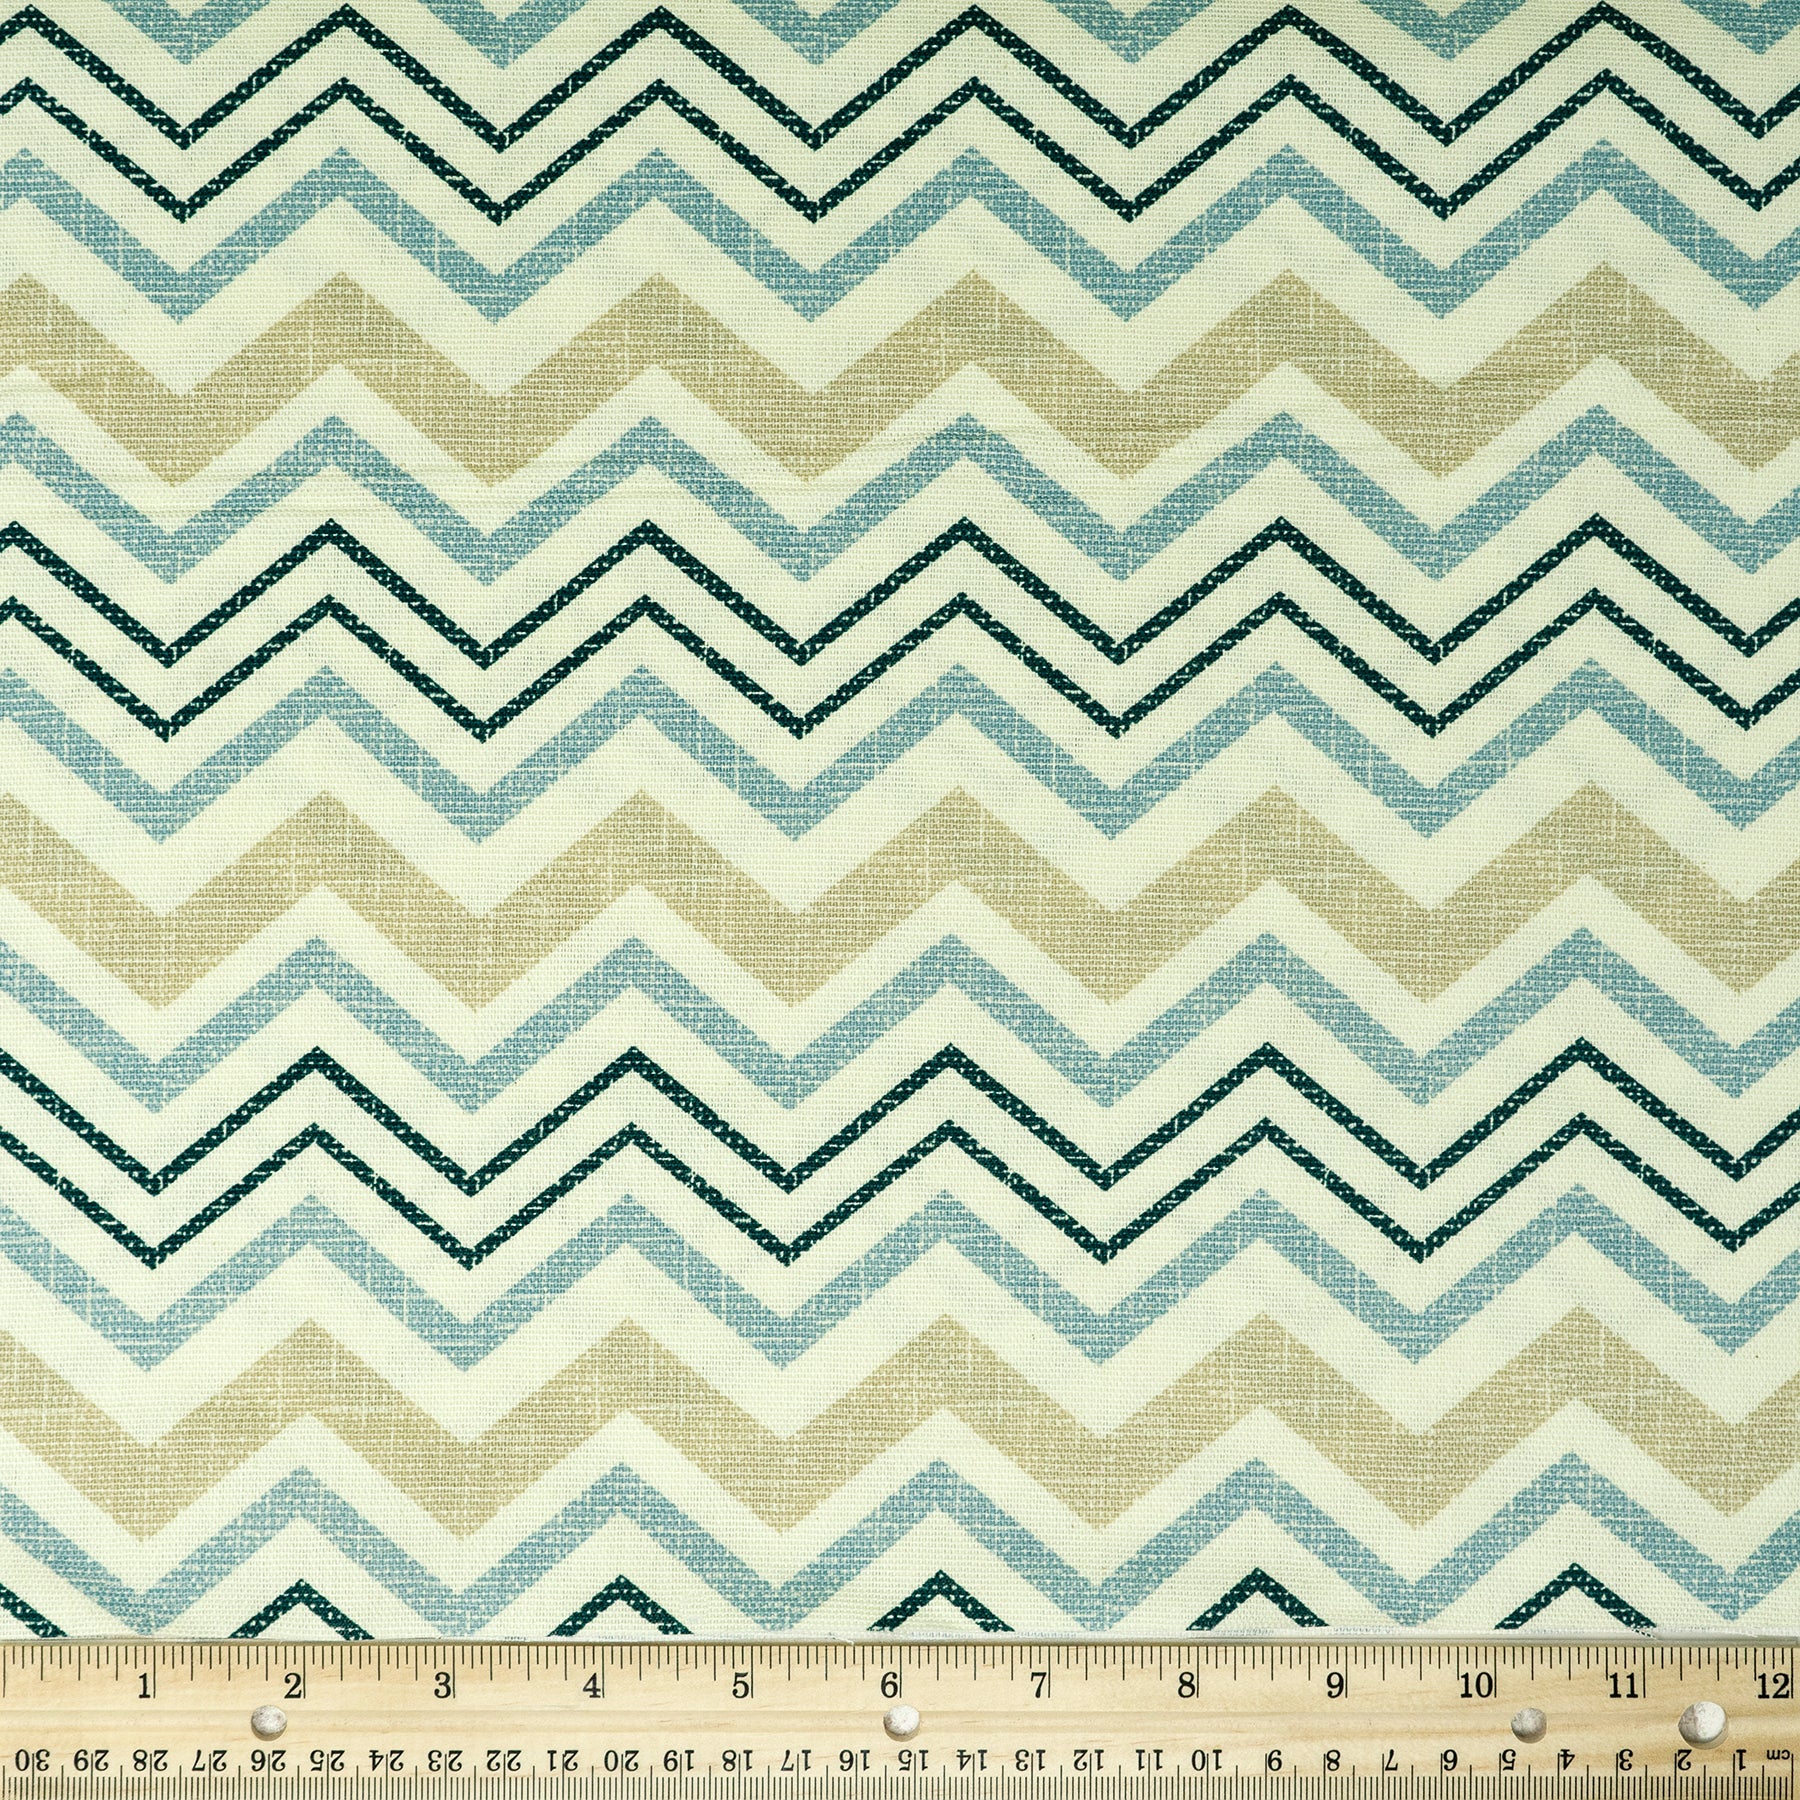 Waverly Inspirations 100% Cotton Duck 45" Width Chevron Spa Color Sewing Fabric by the Yard